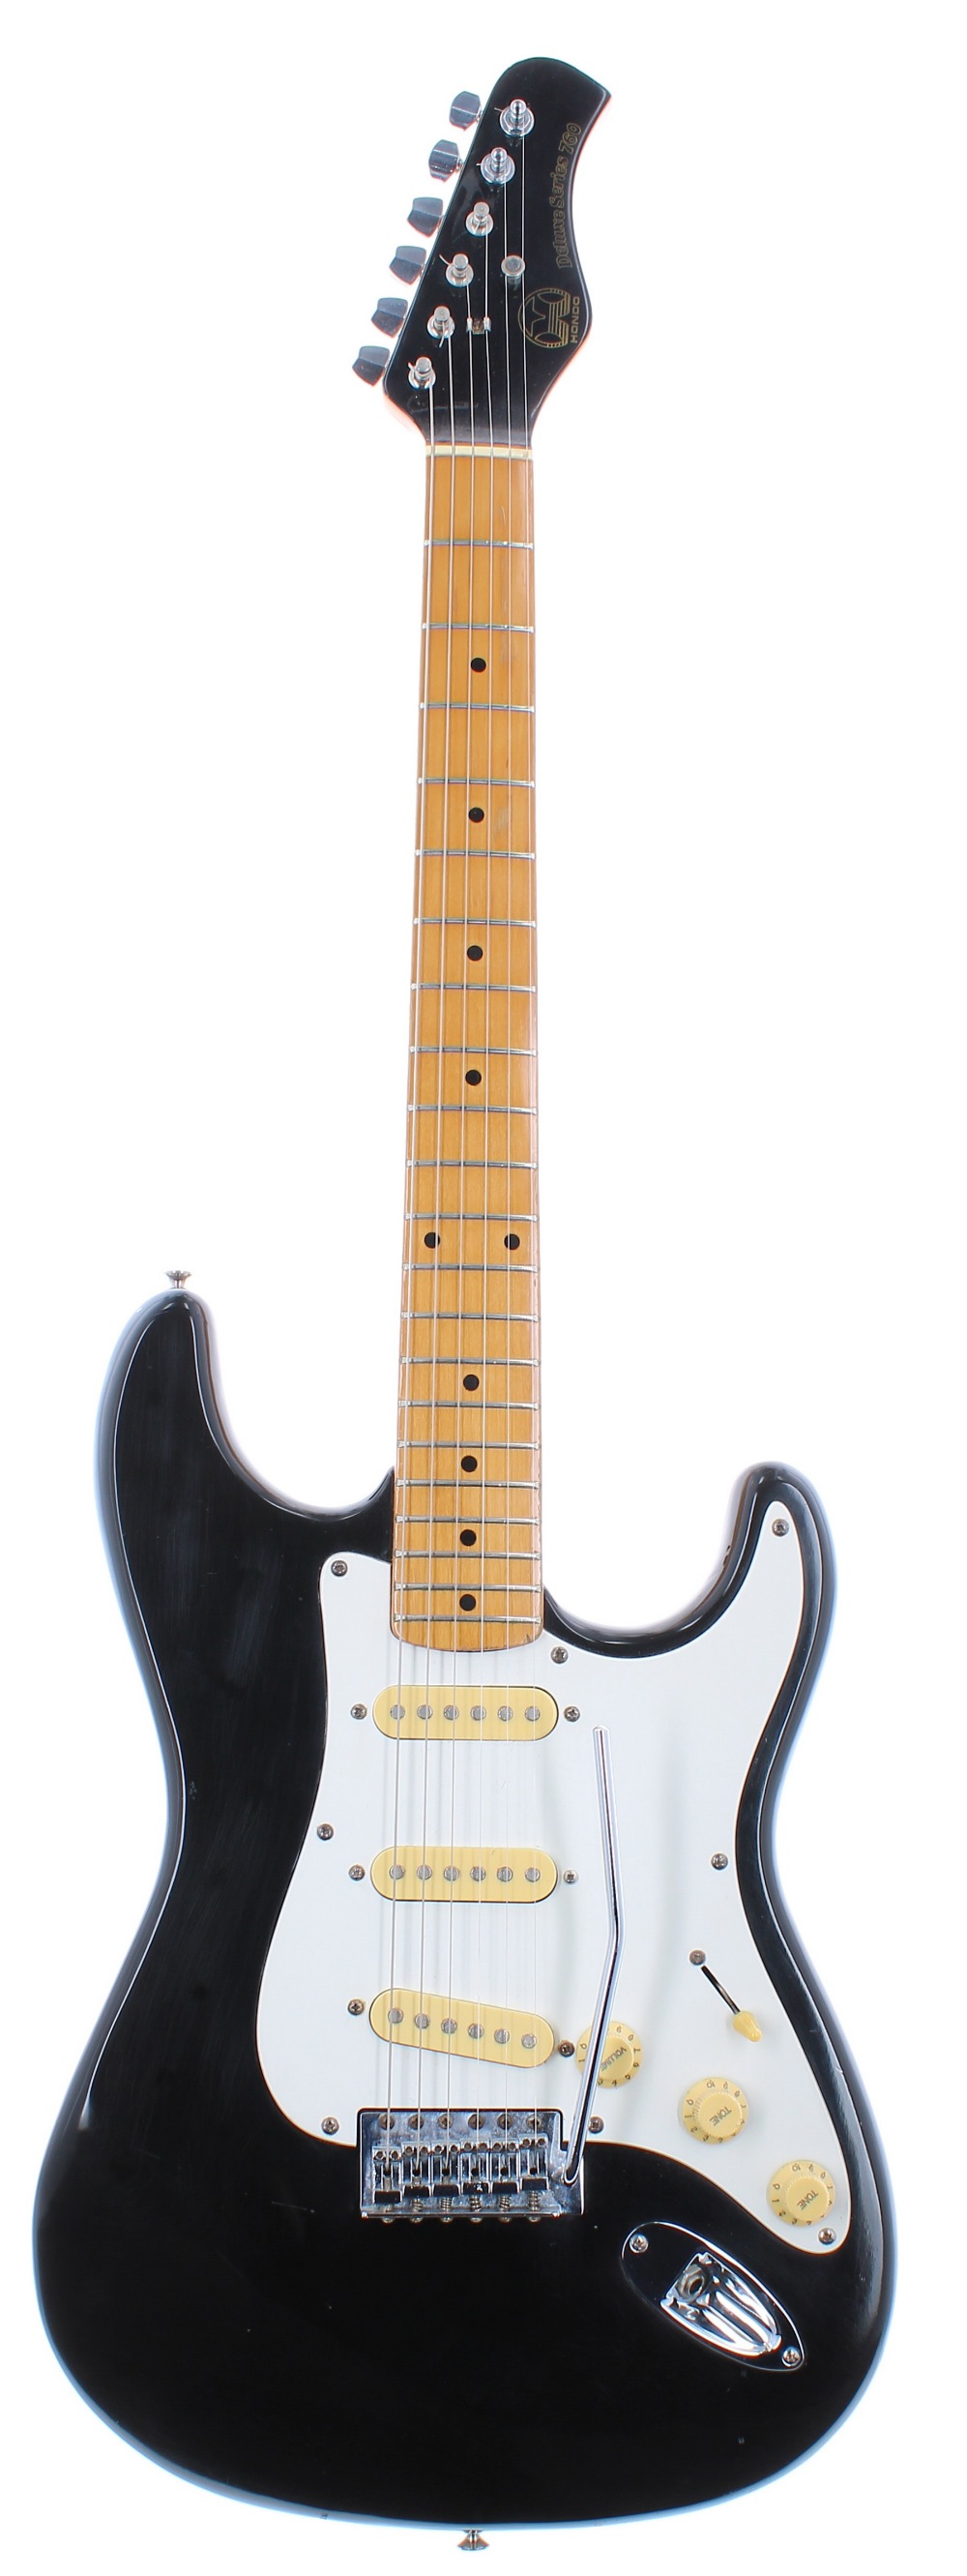 1980s Hondo Deluxe Series H-760 electric guitar; Finish: black, surface scratches and various